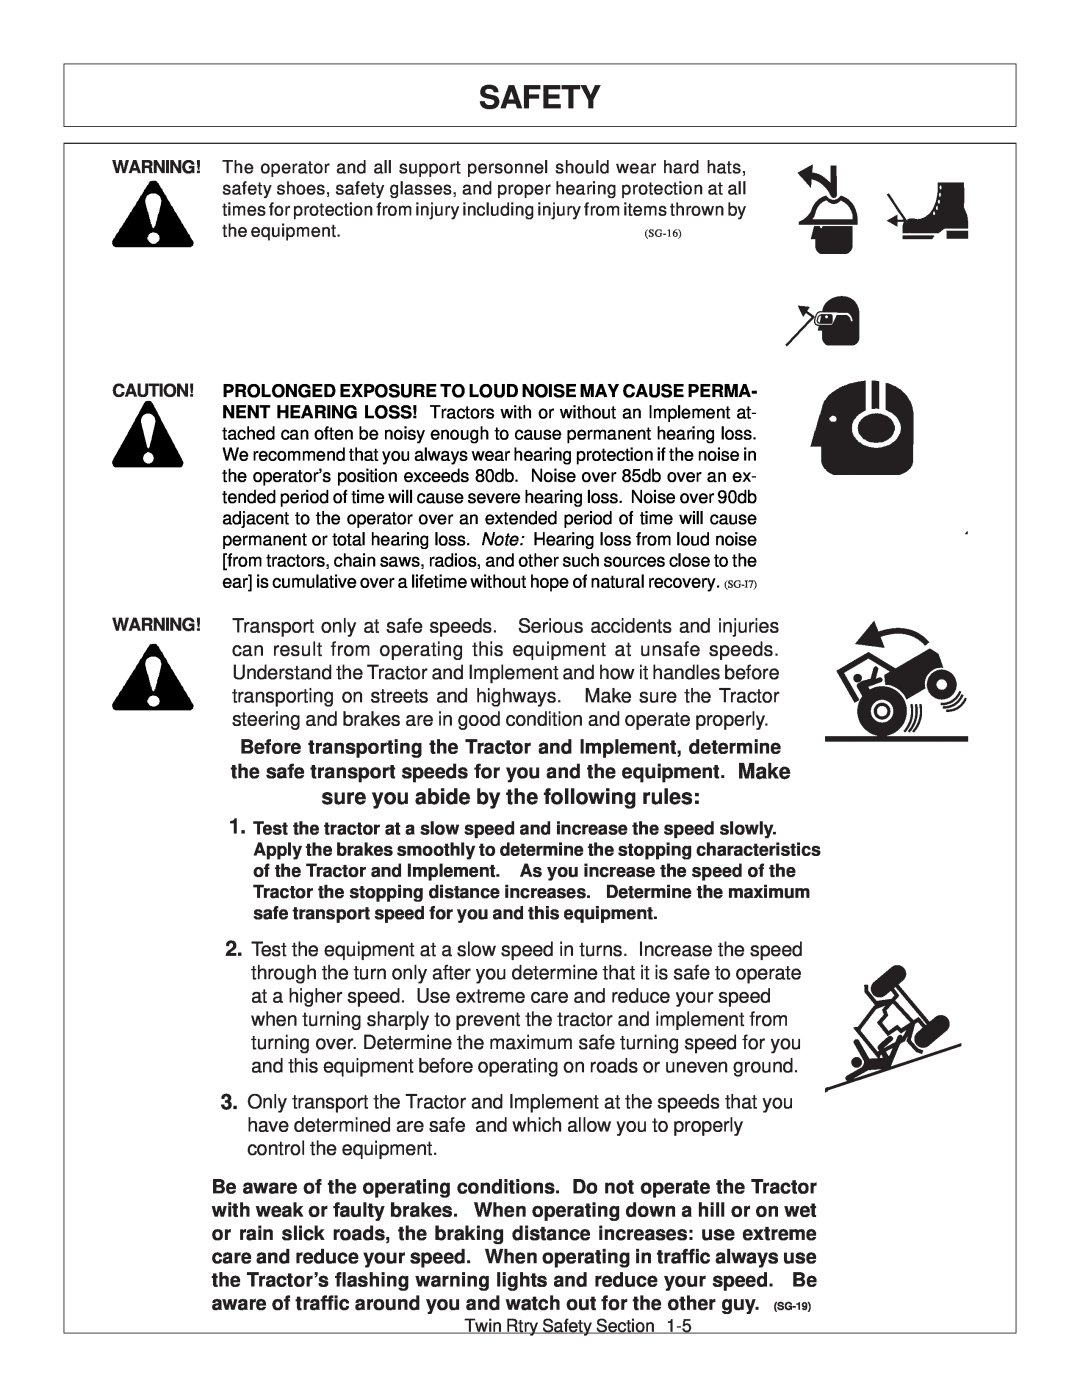 Tiger Products Co., Ltd 6020009 manual Safety, sure you abide by the following rules 